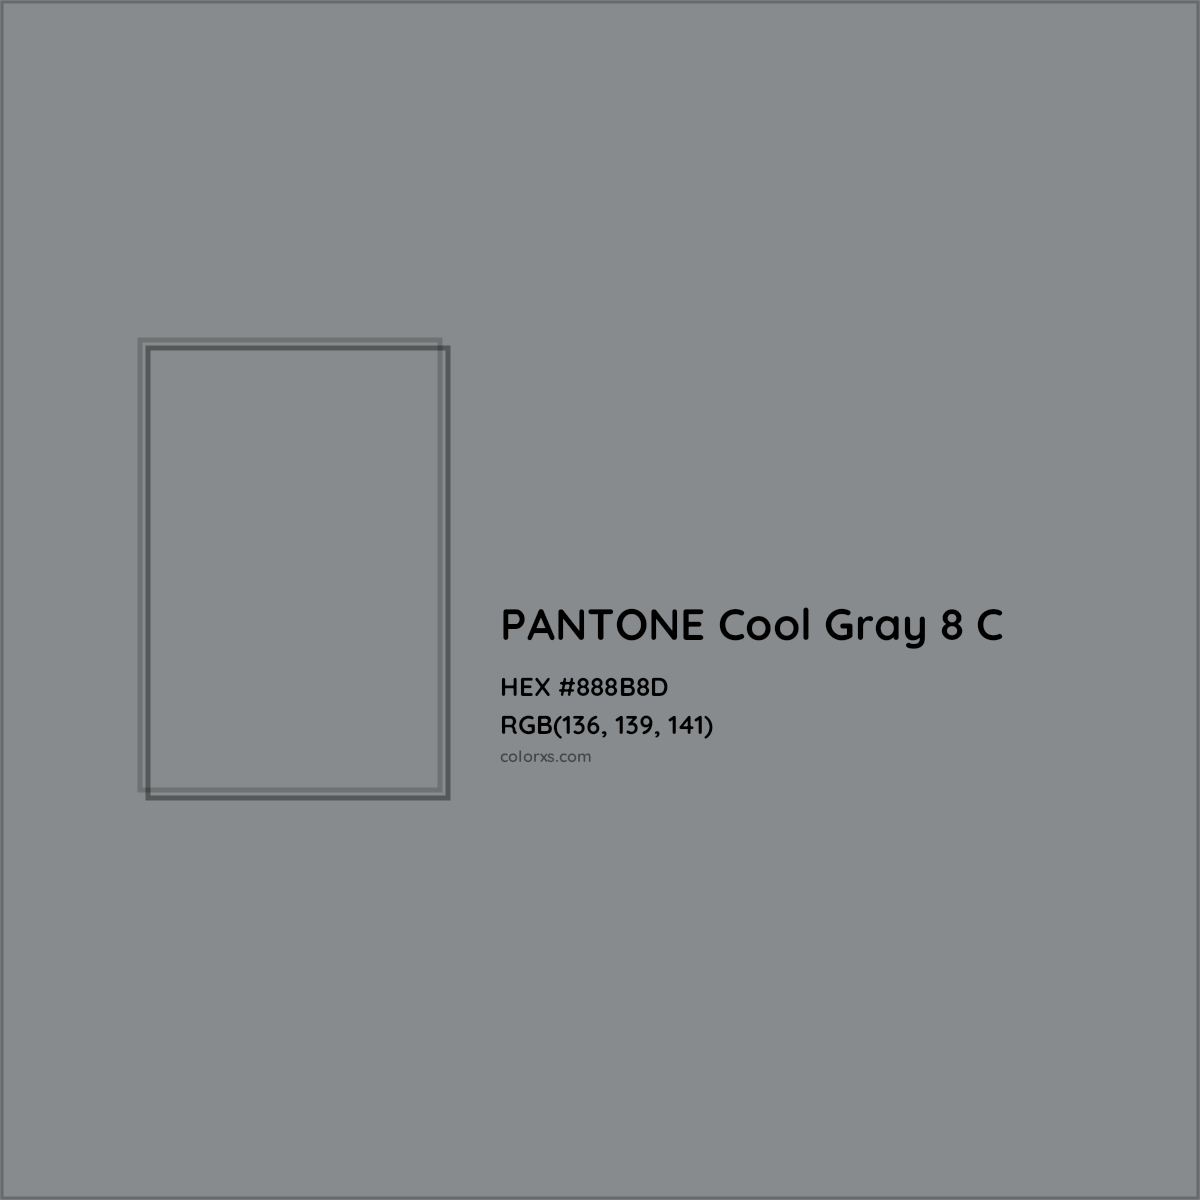 About Pantone Cool Gray 8 C Color Color Codes Similar Colors And